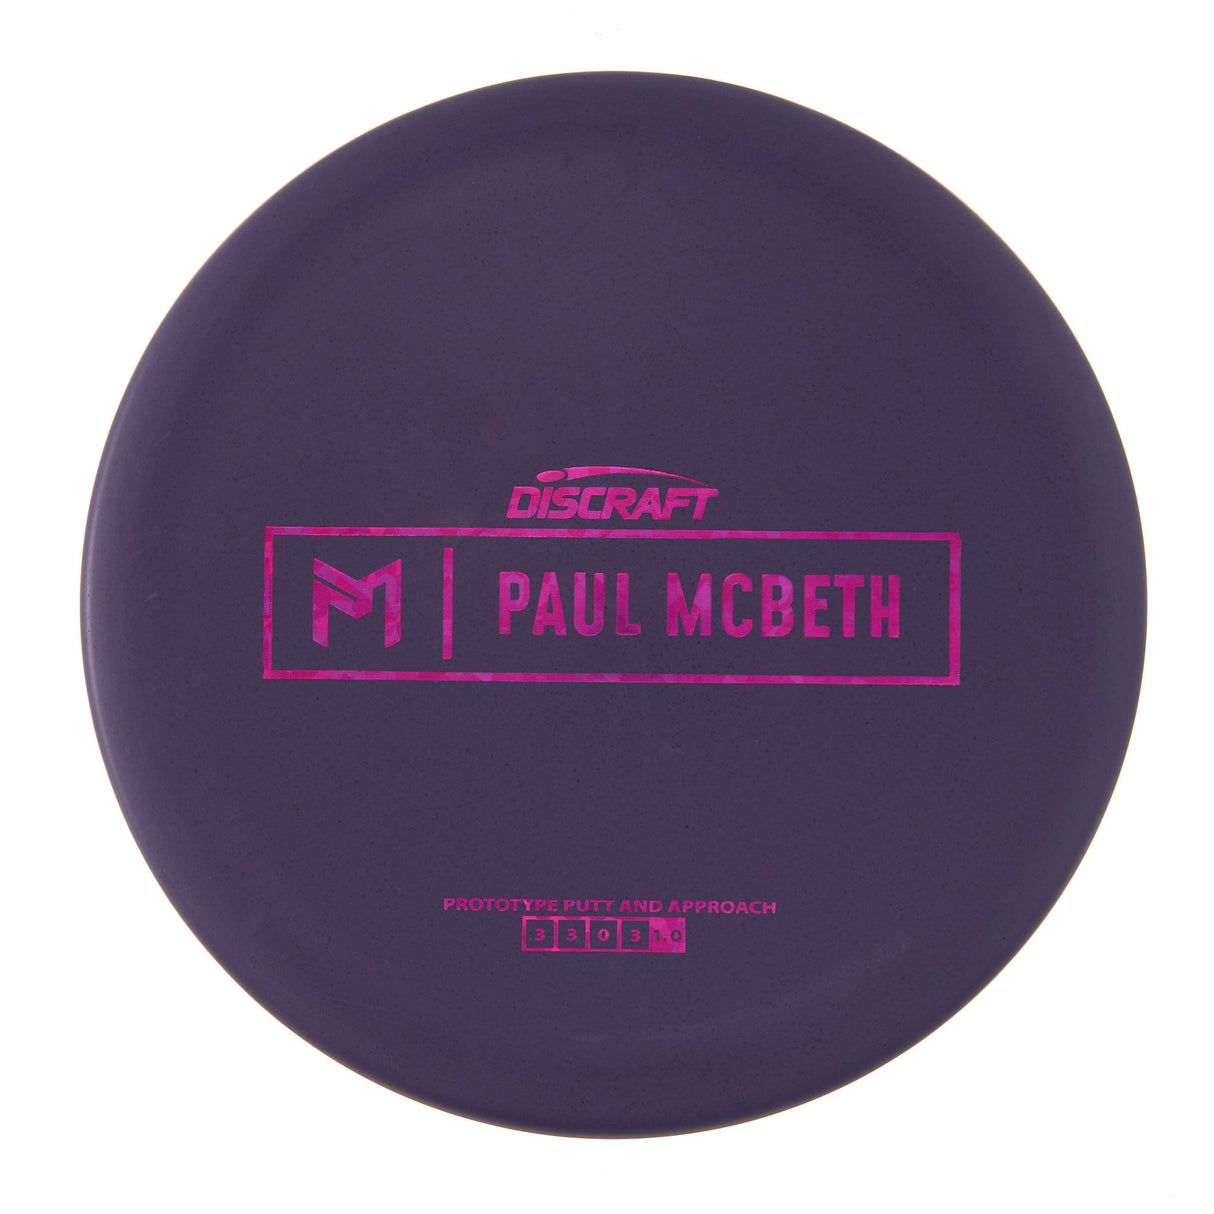 Discraft Kratos - Mcbeth Prototype Special Rubber Blend 175g | Style 0015